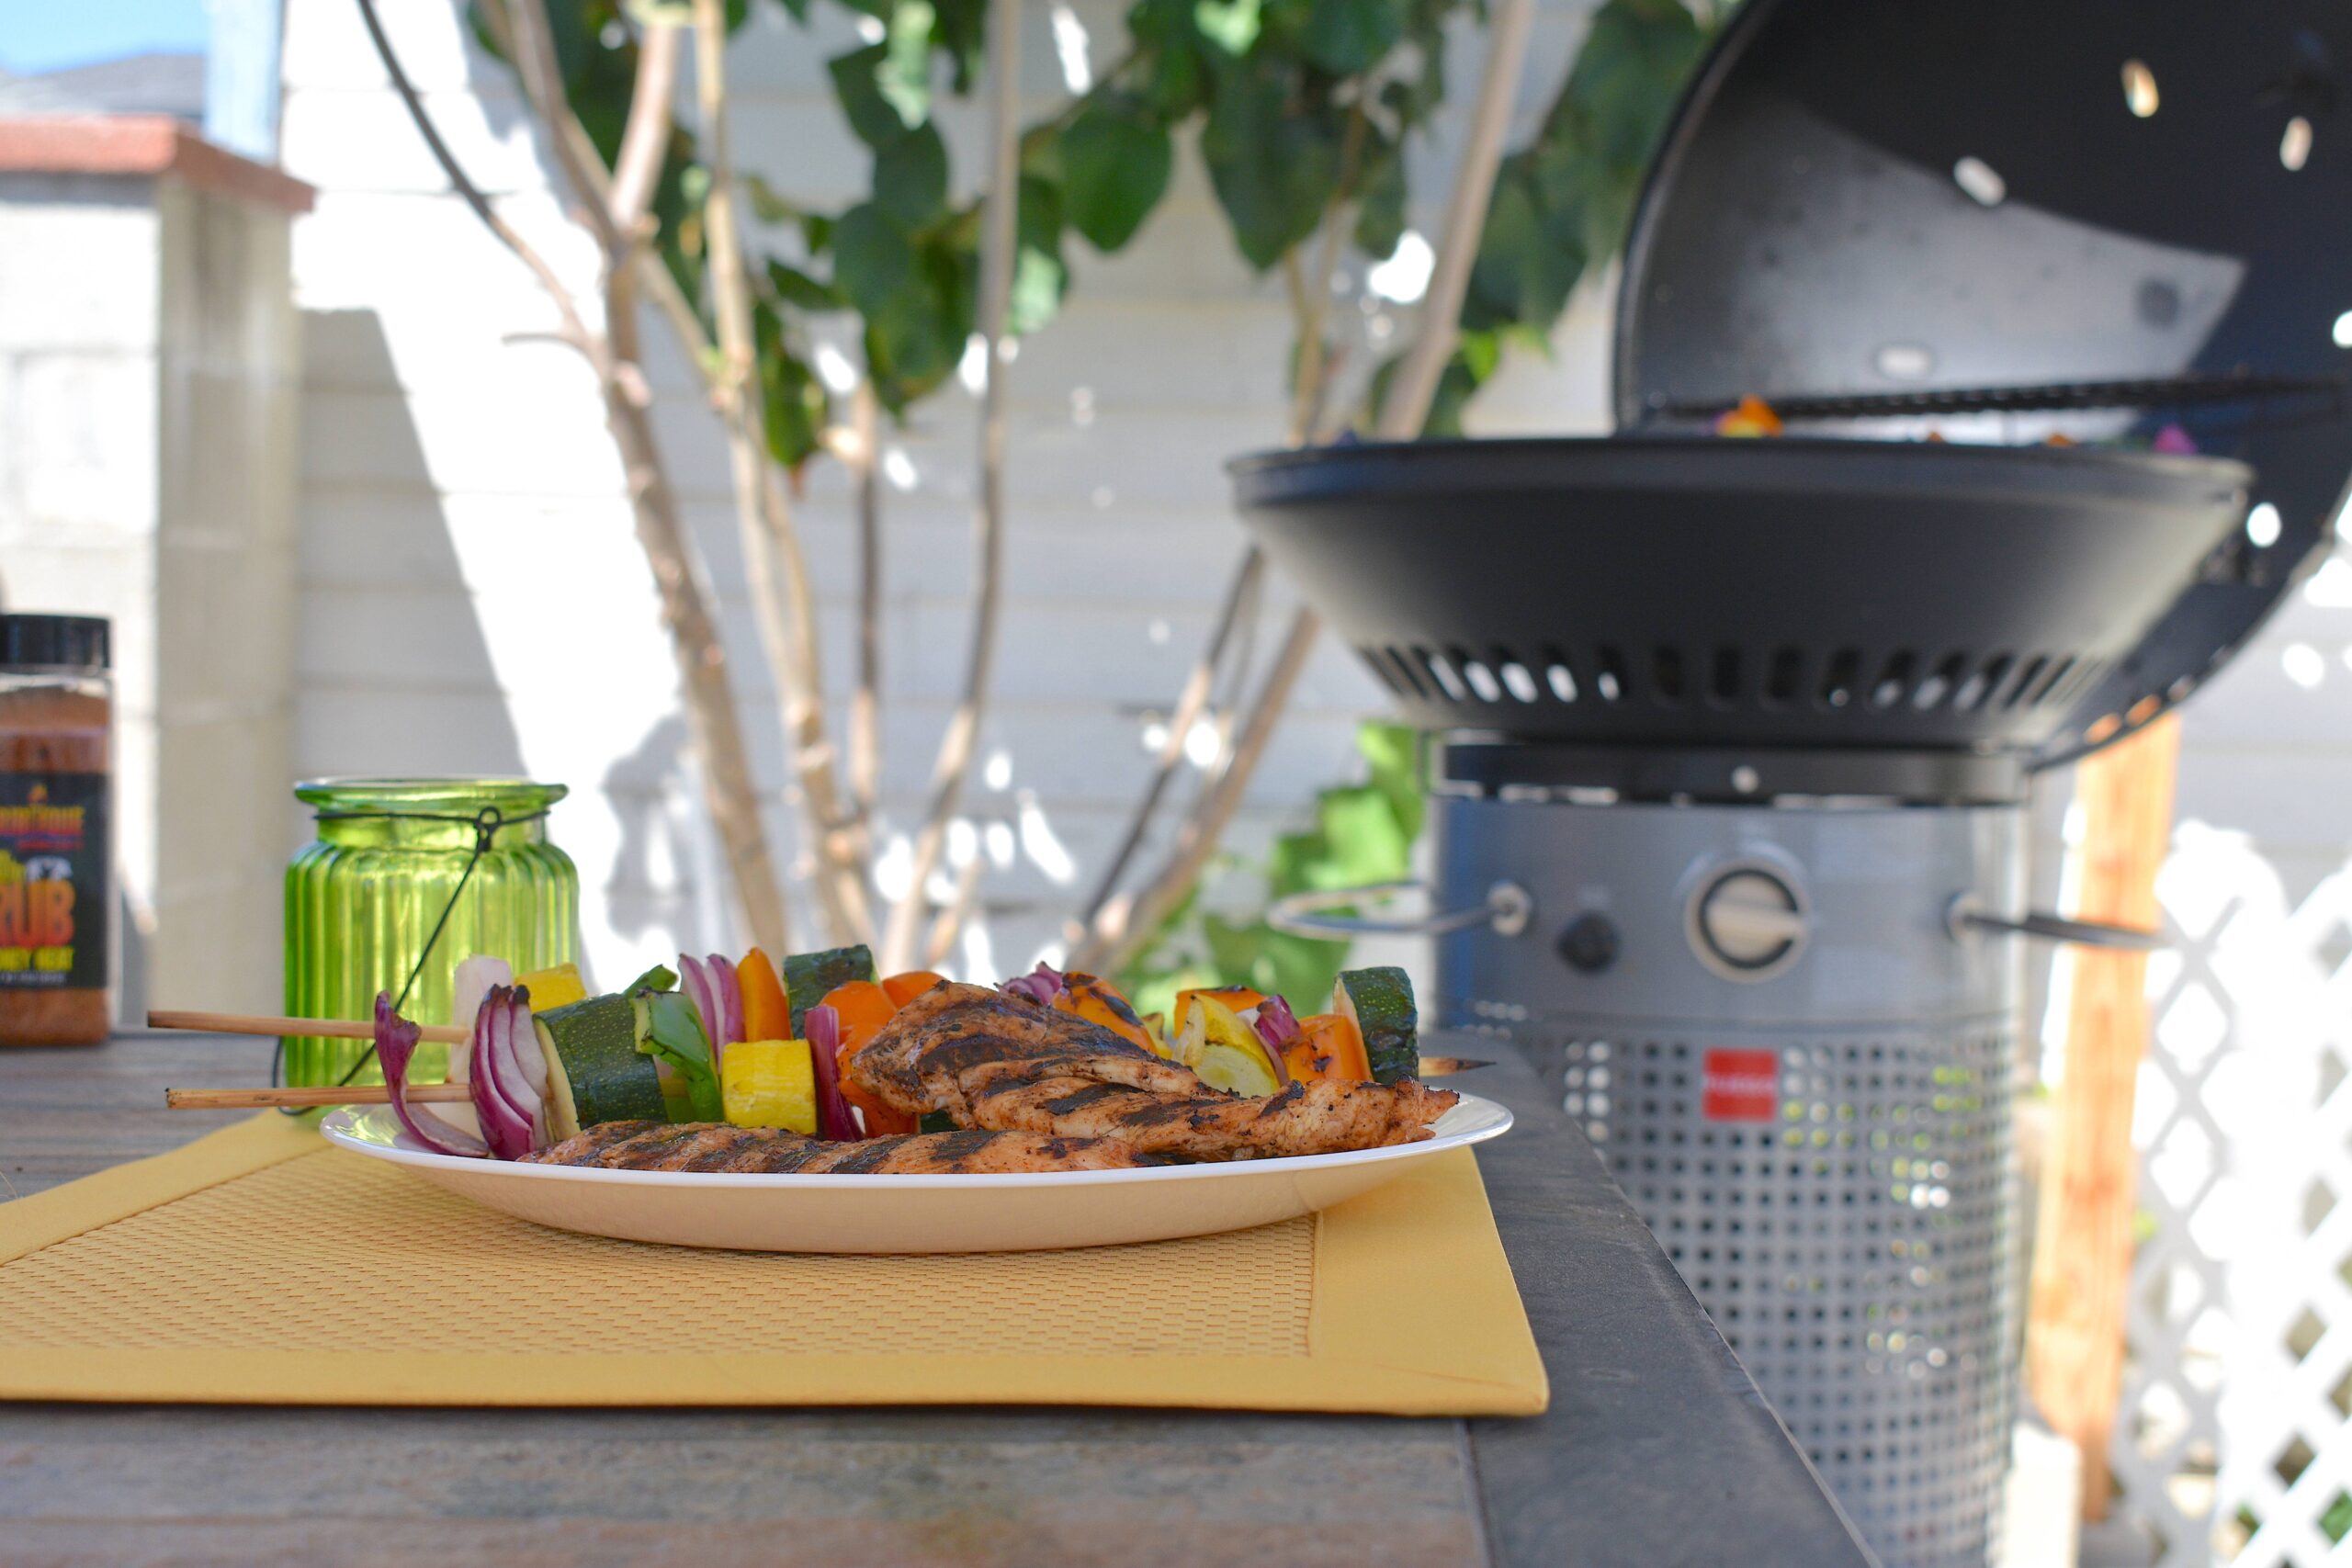  How to Choose the Right Outdoor Oven for Your Patio